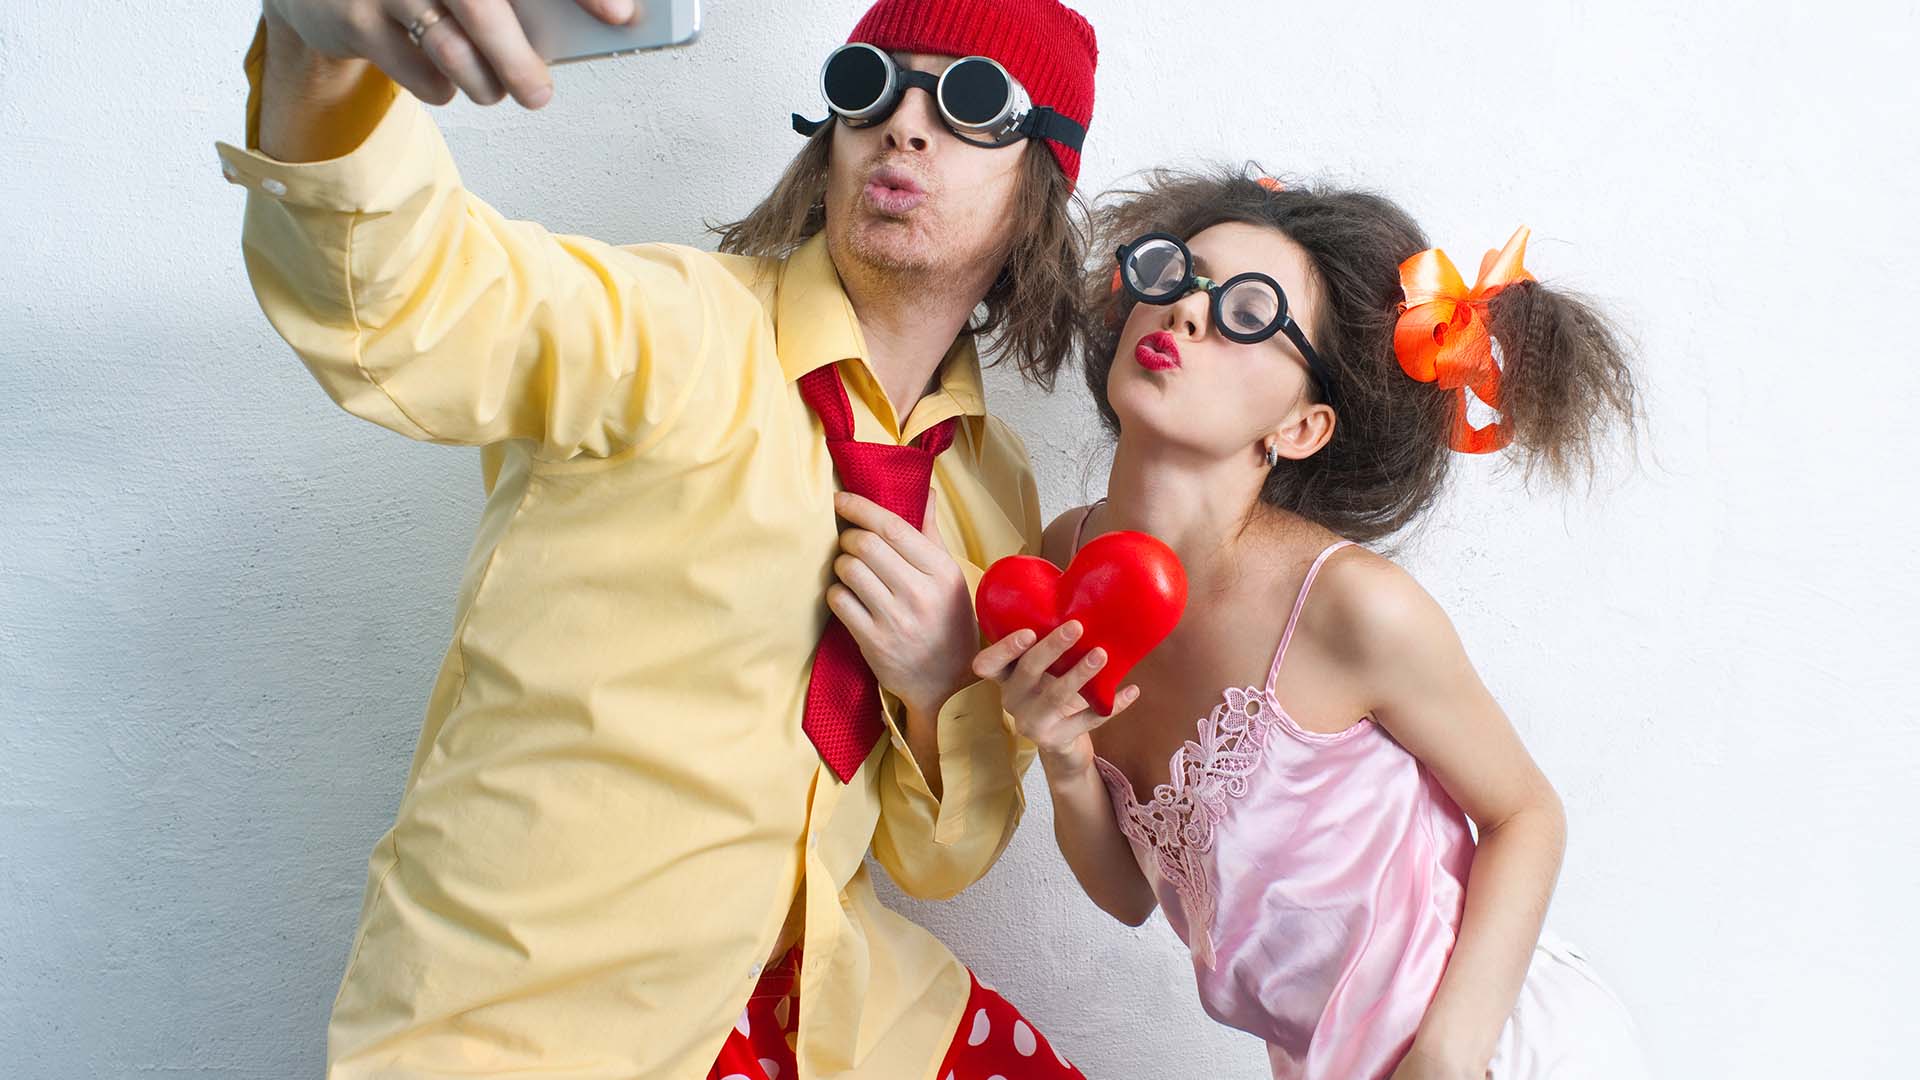 Brunette man and woman taking a selfie. The man is dressed in a yellow and red suit and woman in pink silk pajamas.